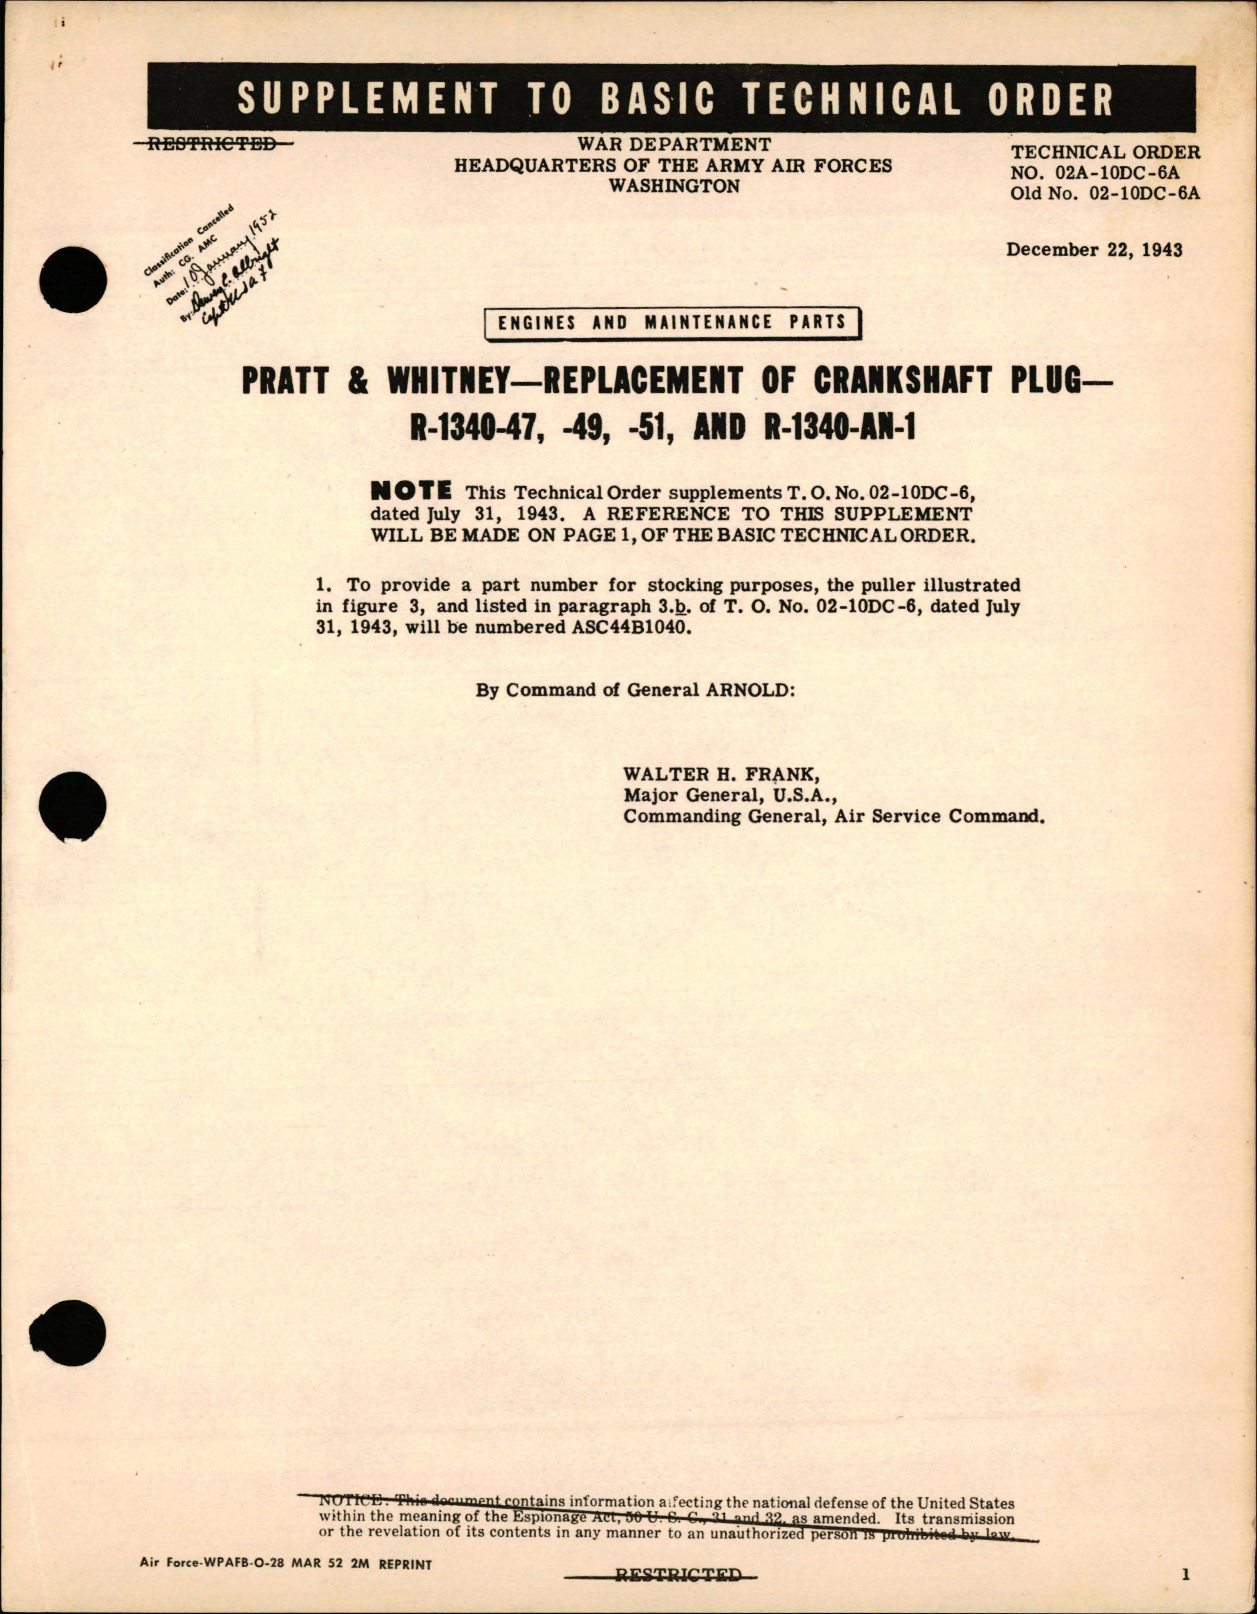 Sample page 1 from AirCorps Library document: Supplement to Replacement of Crankshaft Plug for R-1340-47, R-1340-49, R-1340-51 and R-1340-AN-1